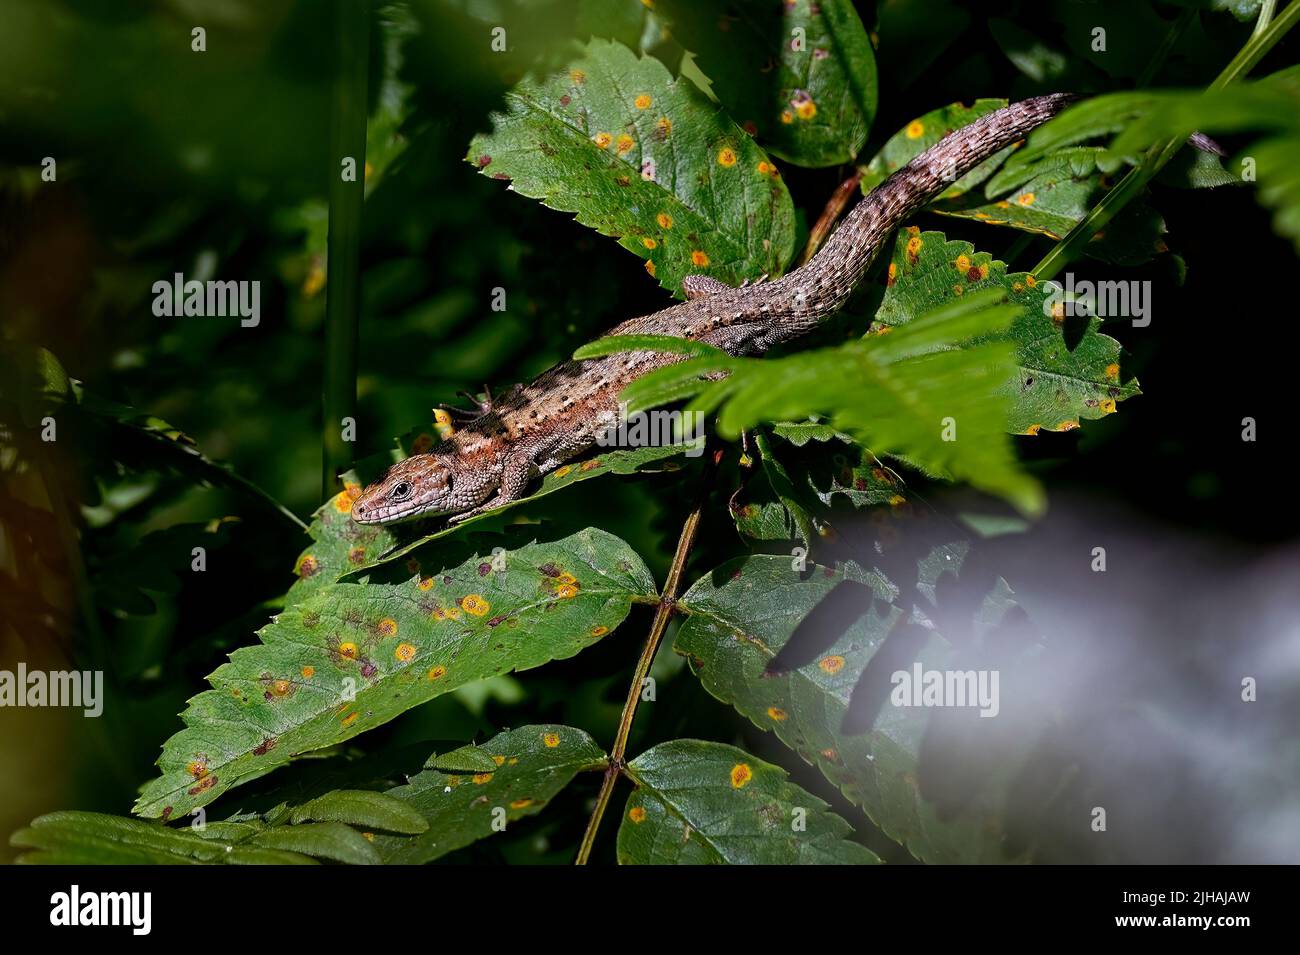 Viviparous lizard in the forest Stock Photo